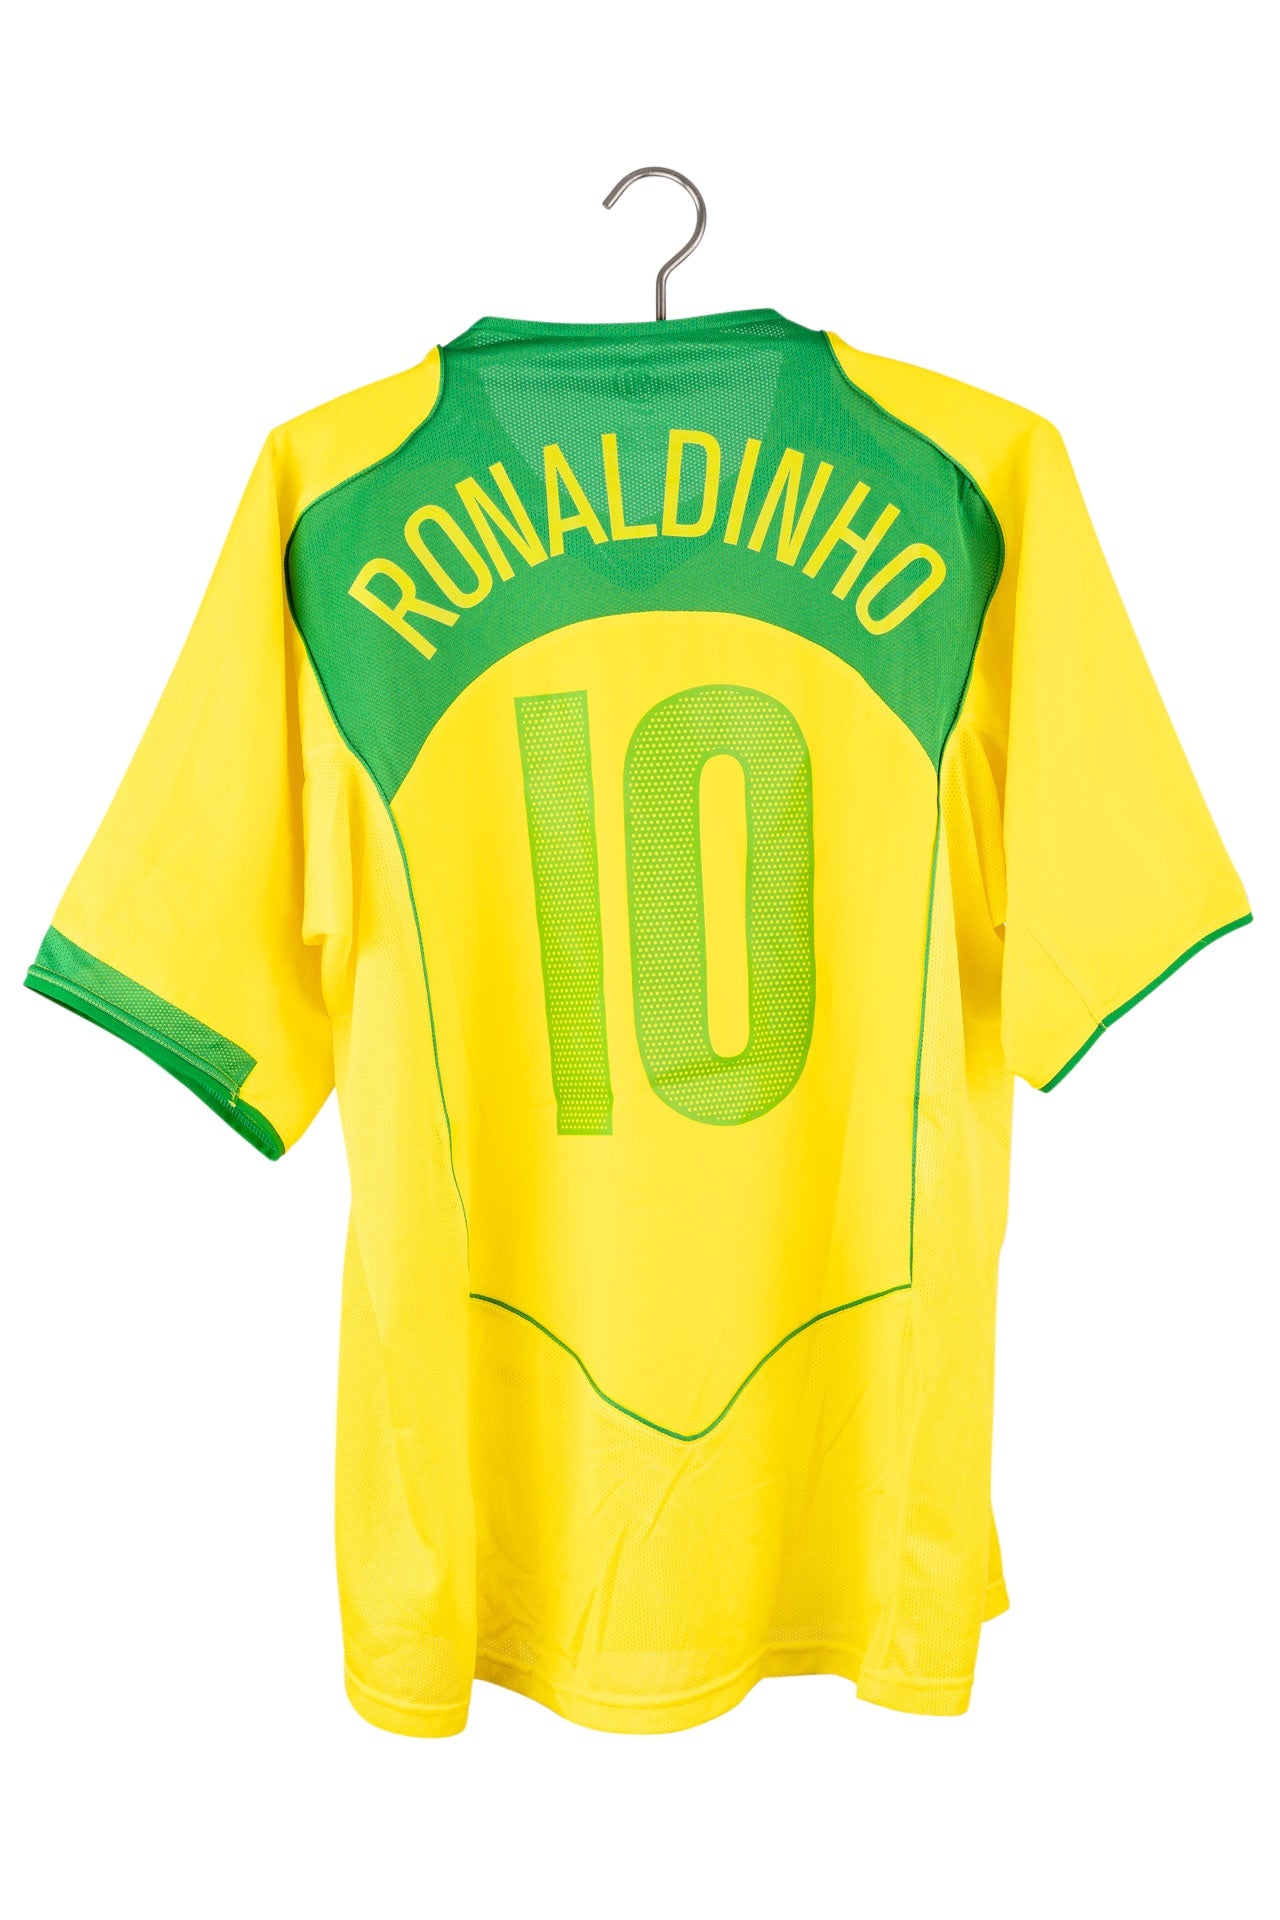 back side view of the 2004 Copa America Retro Brazil Home Retro Soccer Jersey number 102004 Brazil Jersey - Brazil Retro Soccer Jersey 2004 | MuchoGoal Kits